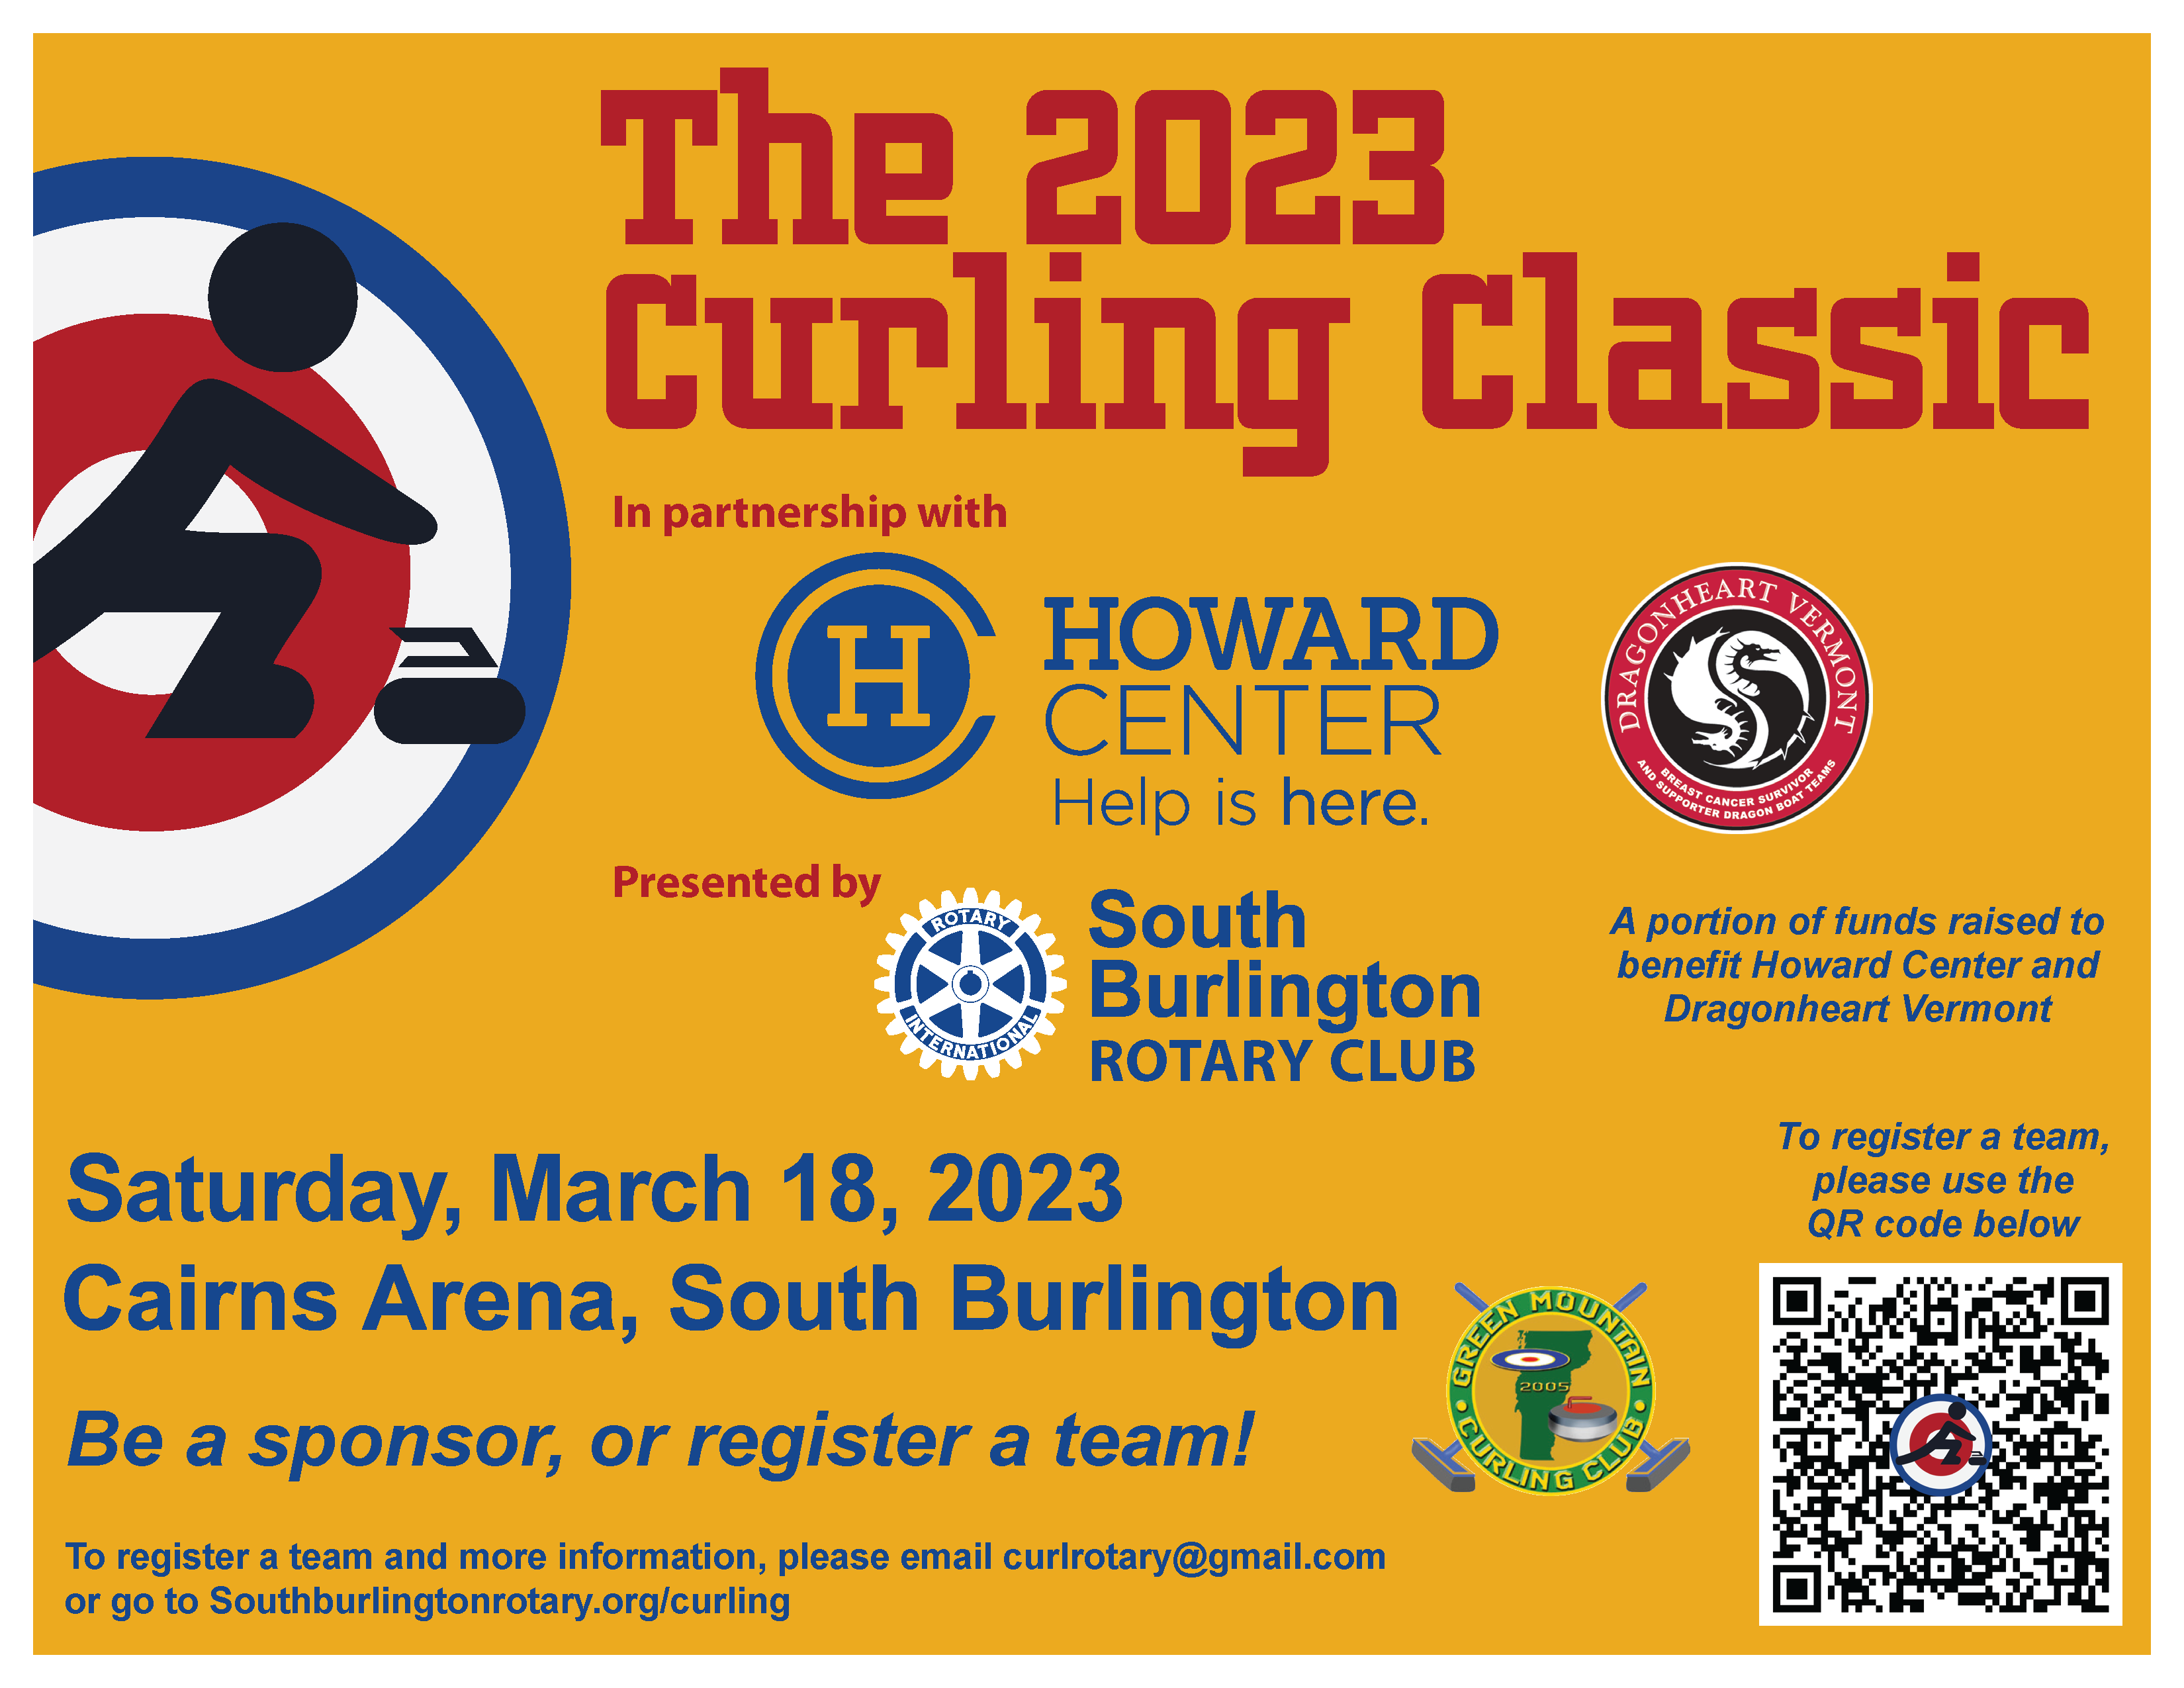 Poster for the 2023 curling event on March 18